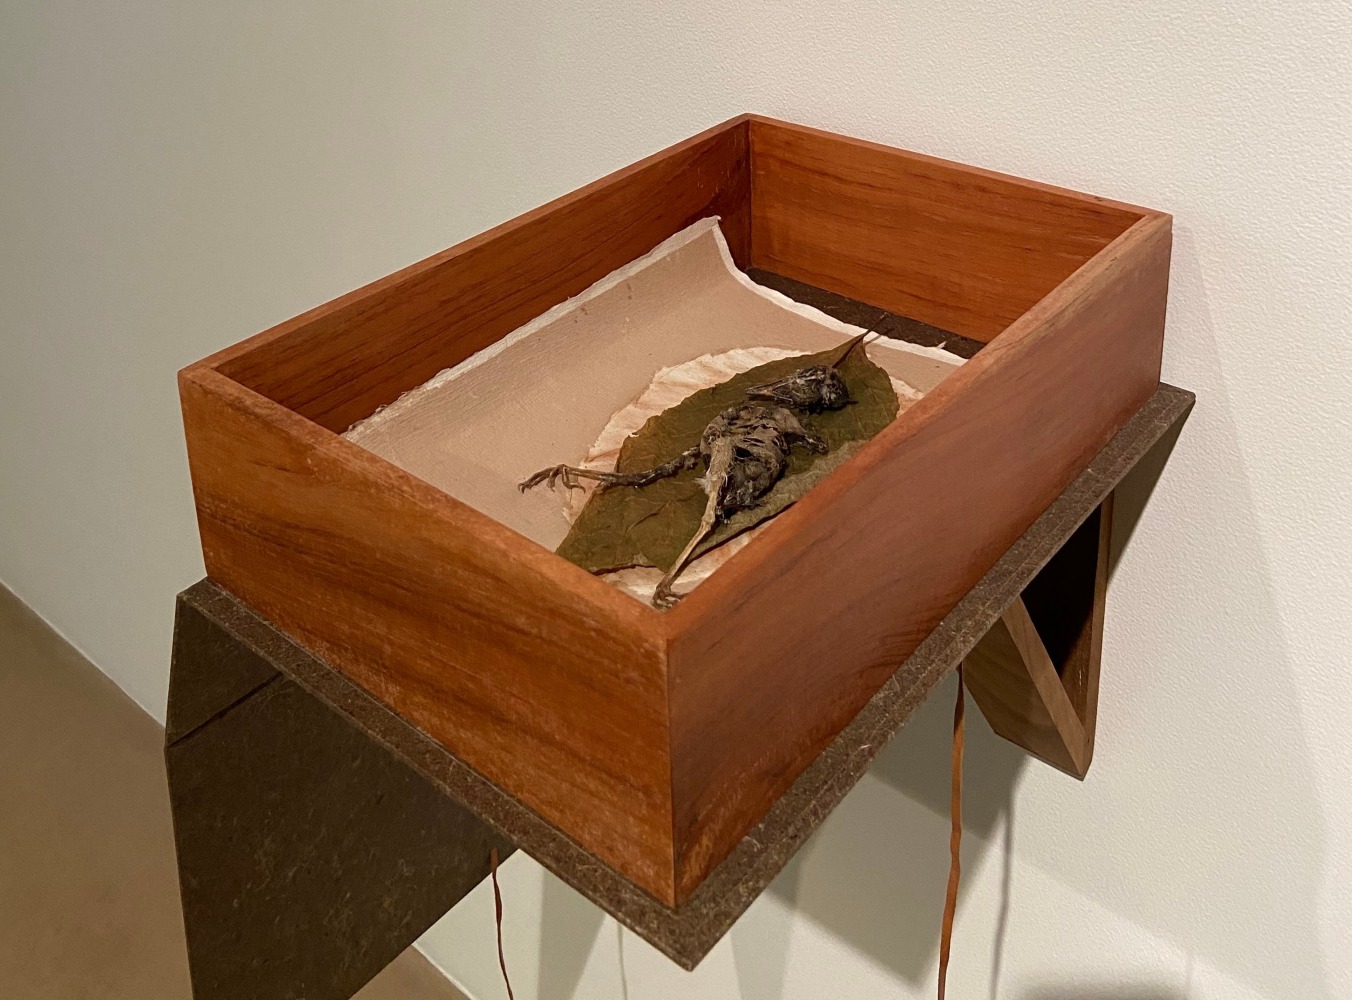 BENITHA PERCIYAL

BOOKCASE I &amp;mdash;&amp;nbsp;Will you leave me here dying, 2021,

Handmade bookcase of Banana fibre &amp;amp; wood, impression of leaf on handmade paper, found skeleton of Myna

14.5 x 10 x 4 in / 36.8 x 25.4 x 10.1 cm